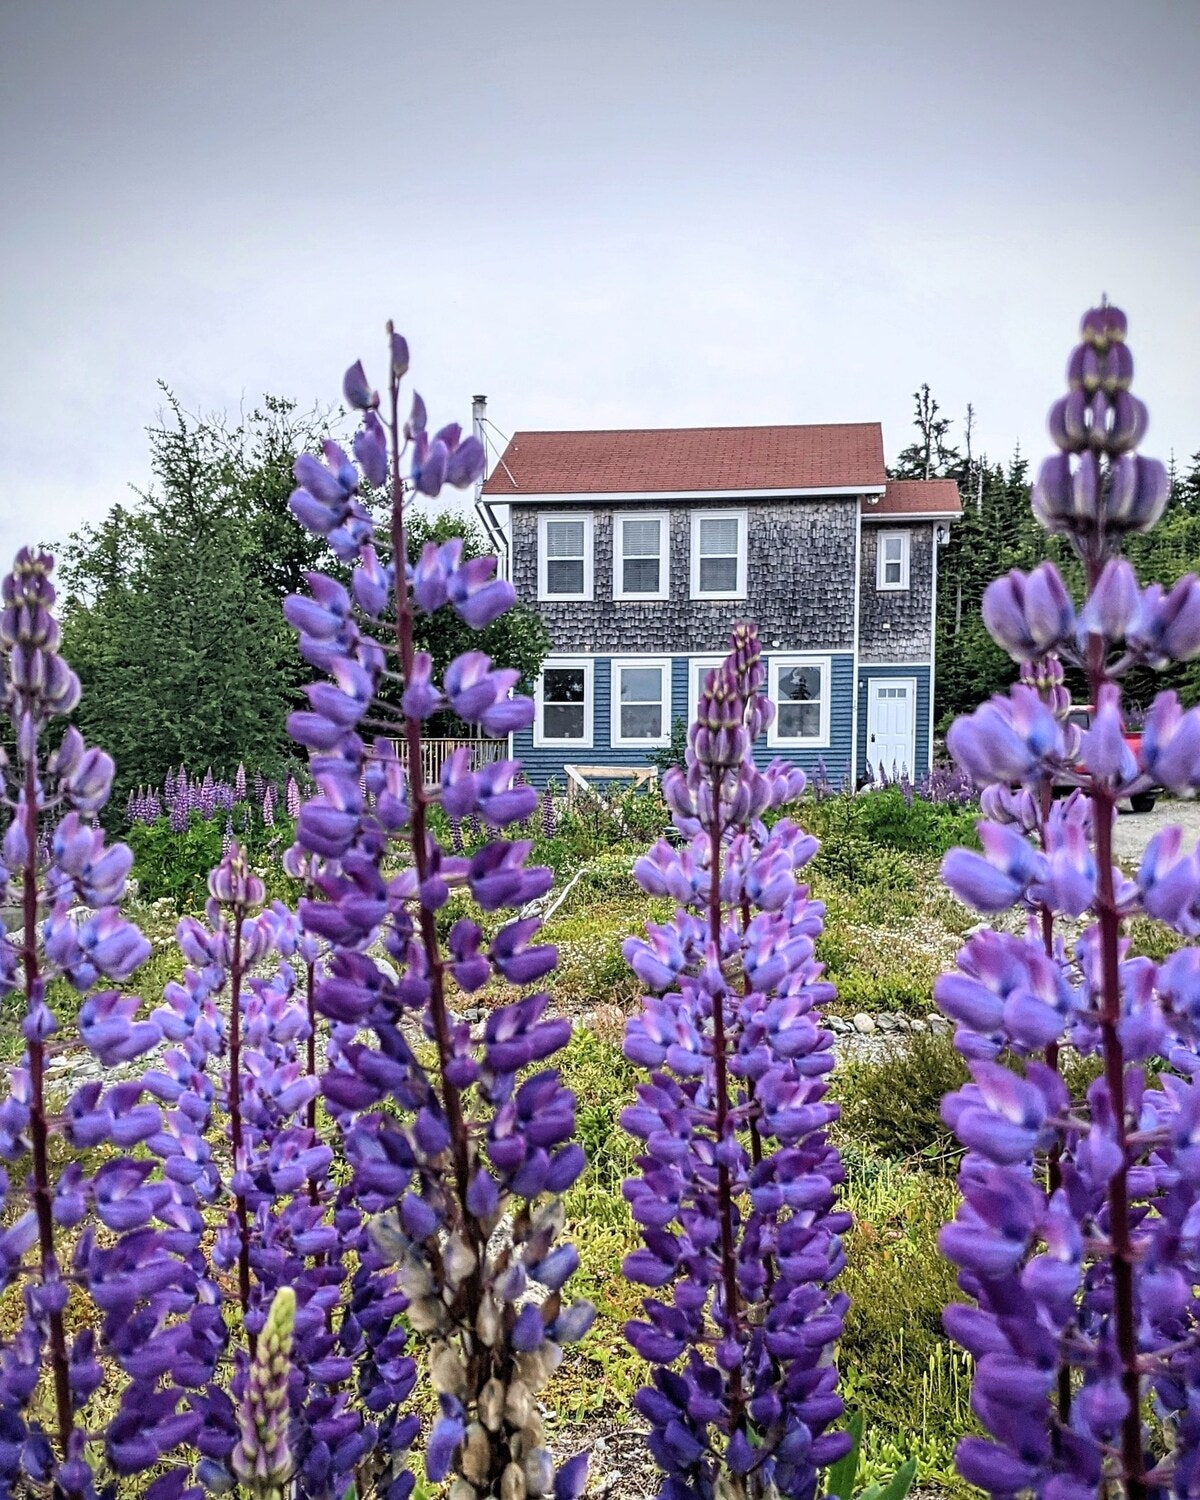 <a href="https://www.cntraveler.com/story/newfoundland-canada-road-trip?mbid=synd_msn_rss&utm_source=msn&utm_medium=syndication">Newfoundland</a> is well-known for its breathtaking cliffside iceberg views—and this modern cottage in Port Rexton was made for the traveler looking for that postcard rural Newfoundland scenery. The two-bedroom home is spacious enough for four people (ideally couples) and is walking distance to local attractions like the Port Rexton Brewery, Fishers Loft Restaurant, and more restaurants and bars. Keen to simply settle into the property and soak up the fauna and flora? The Middle Hill Cottage is situated on an acre of private land and features an expansive look-out deck and barbecue for those hoping to unwind in nature. $179, Airbnb (Starting Price). <a href="https://www.airbnb.com/rooms/45524329">Get it now!</a><p>Sign up to receive the latest news, expert tips, and inspiration on all things travel</p><a href="https://www.cntraveler.com/newsletter/the-daily?sourceCode=msnsend">Inspire Me</a>